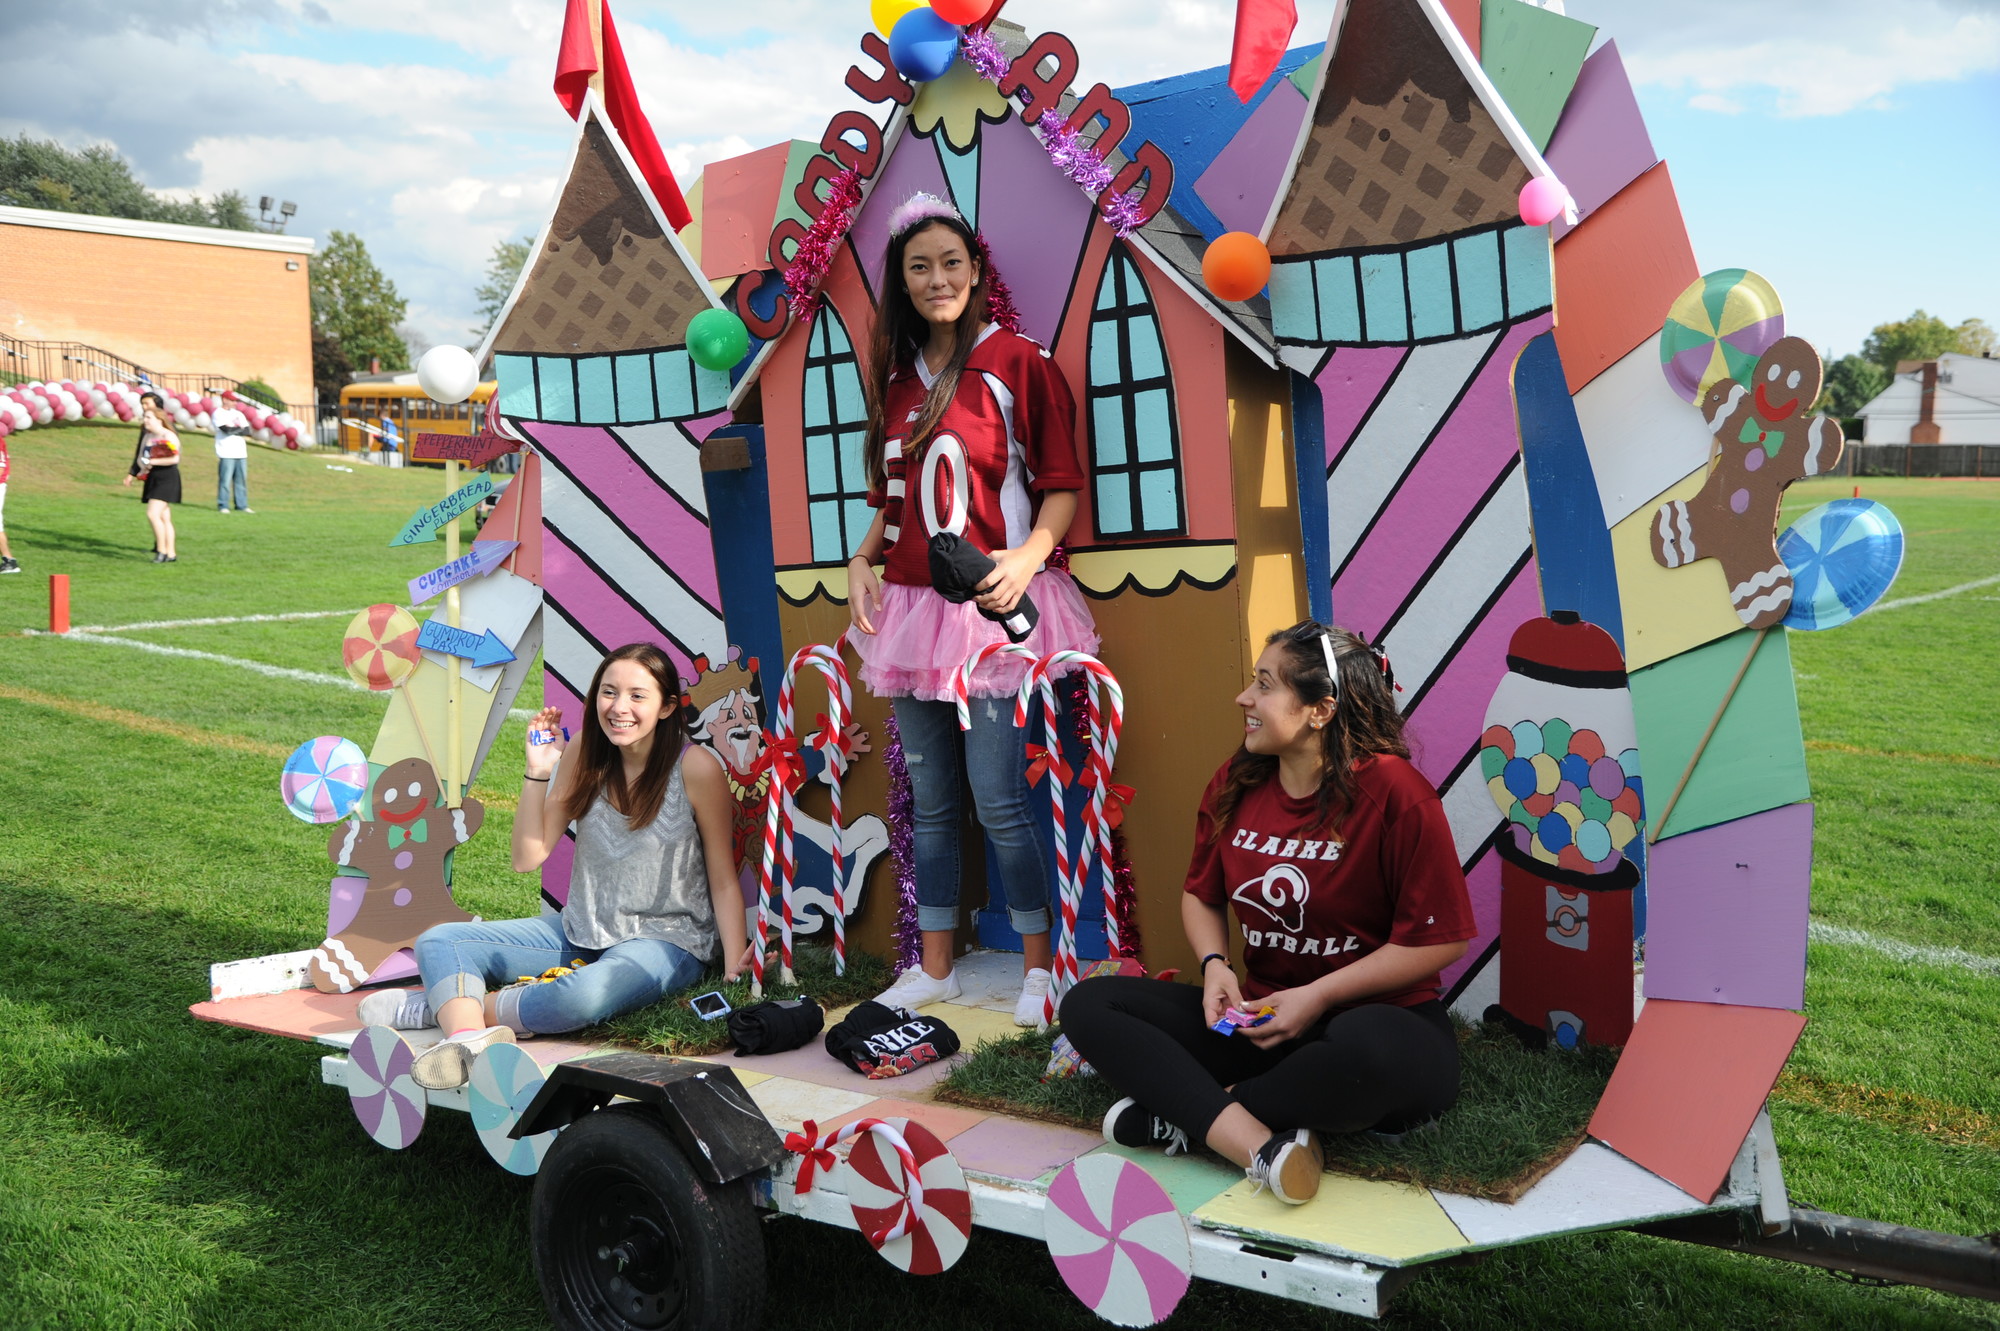 Seniors tossed candy into the crowd in conjunction with their Candy Land class float.